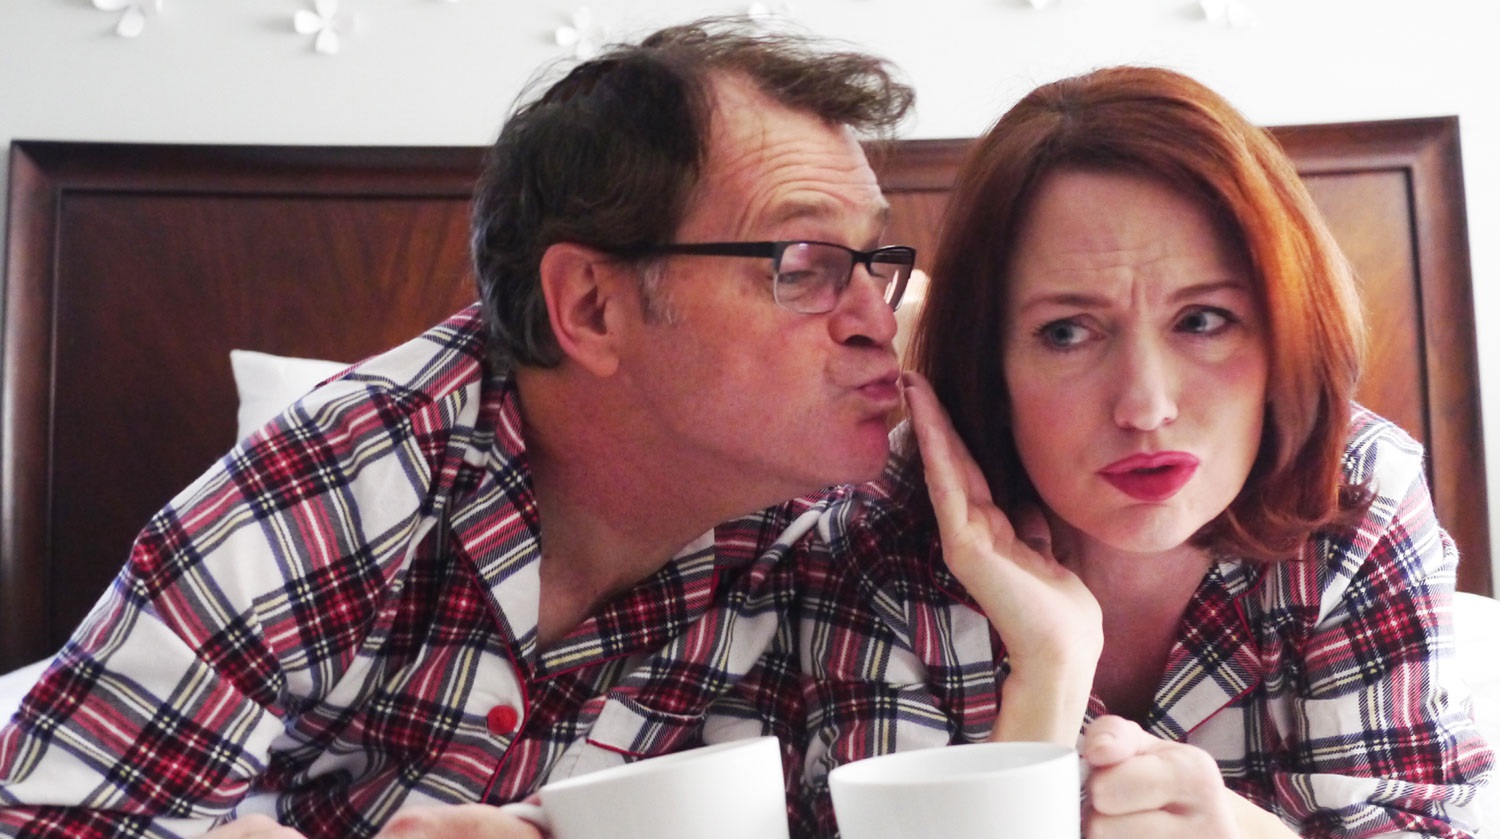 Image of a man and woman dressed in matching red and white flannel pajamas. They both lay side by side on their stomachs atop a bed, which has a wood headboard. They hold white mugs in their hands. The man wears glasses. He is trying to kiss the woman beside him, but she puts her hand up between his lips and her cheek. 